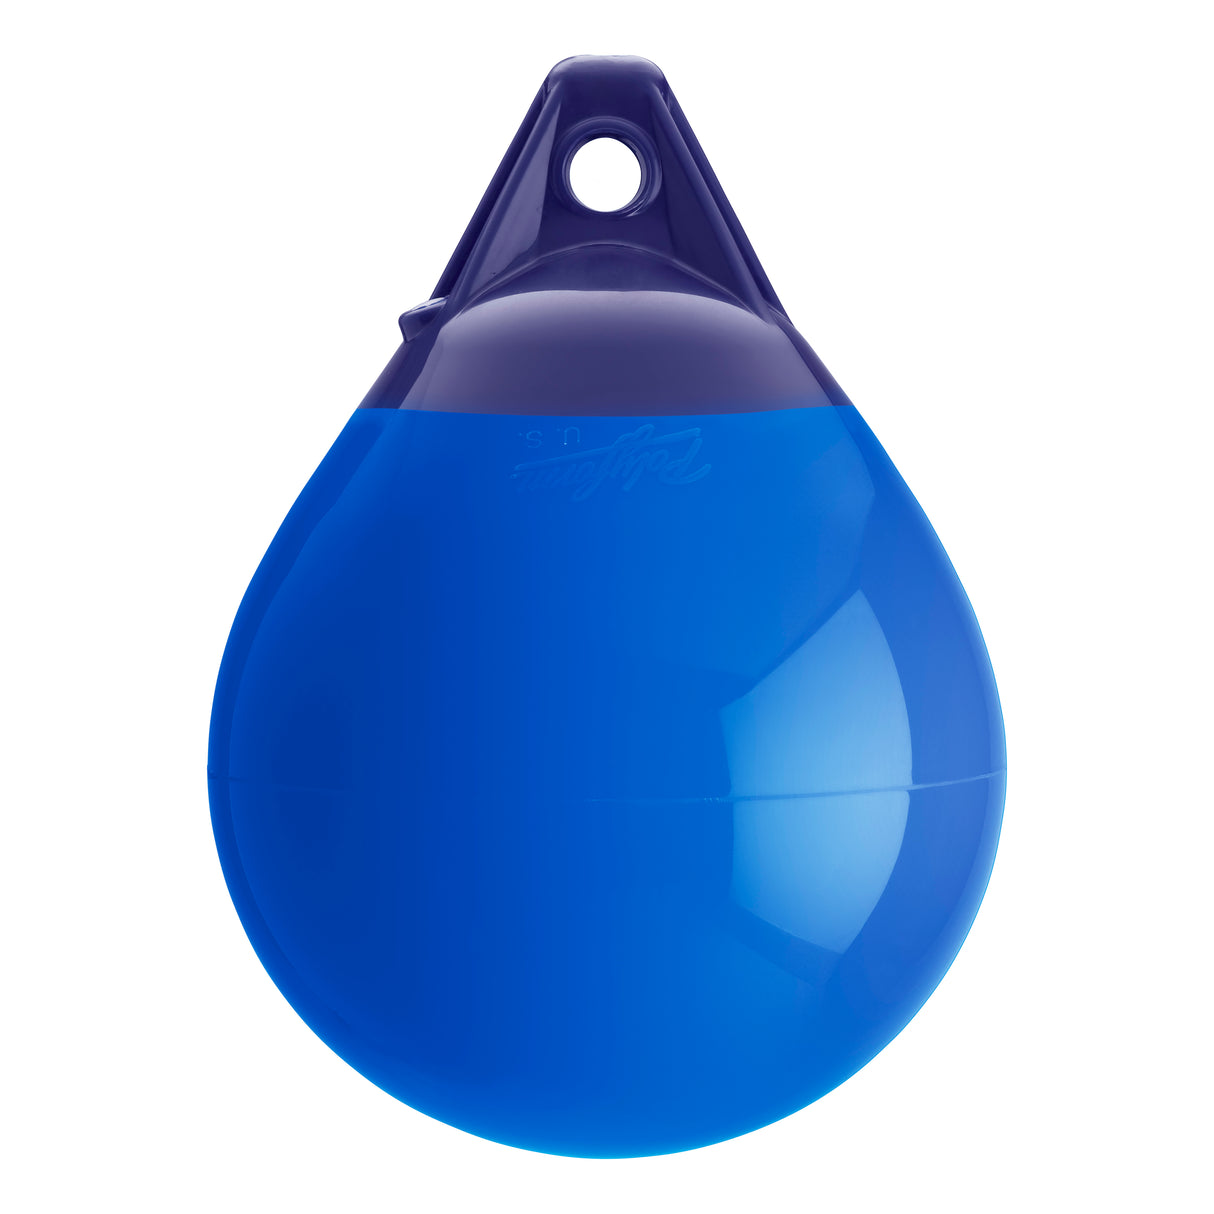 Blue inflatable buoy, Polyform A-1 